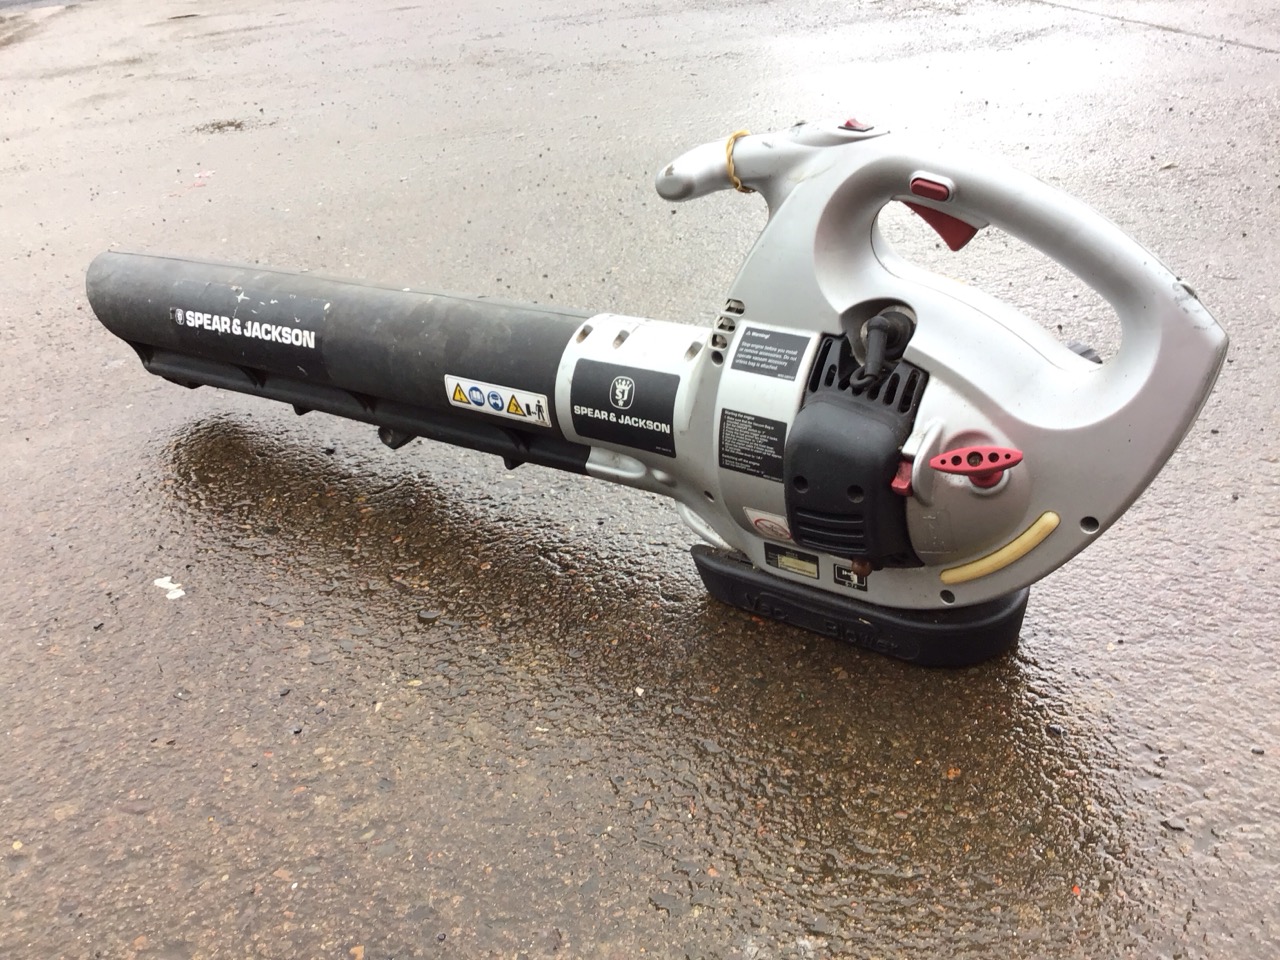 A Spear & Jackson petrol leaf blower vac - model SPJBV 3200, with collection sack, wheeled head - Image 3 of 3